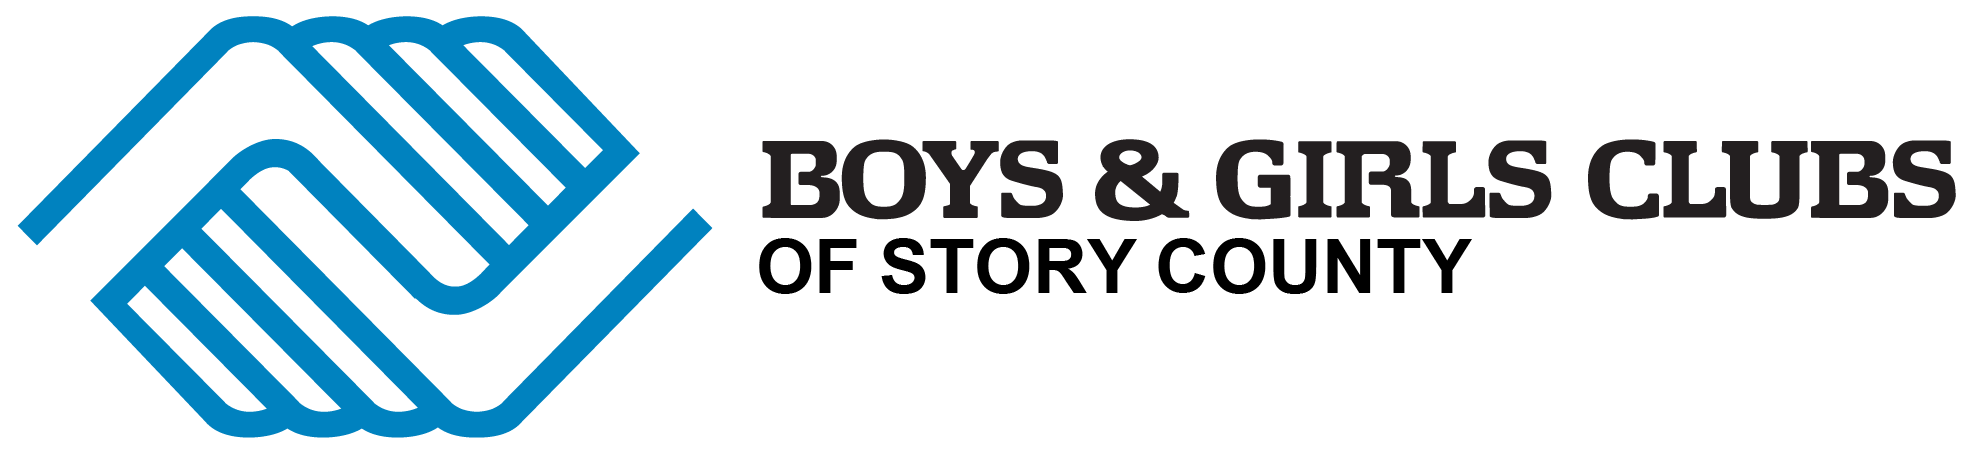 Boys & Girls Clubs of Story County